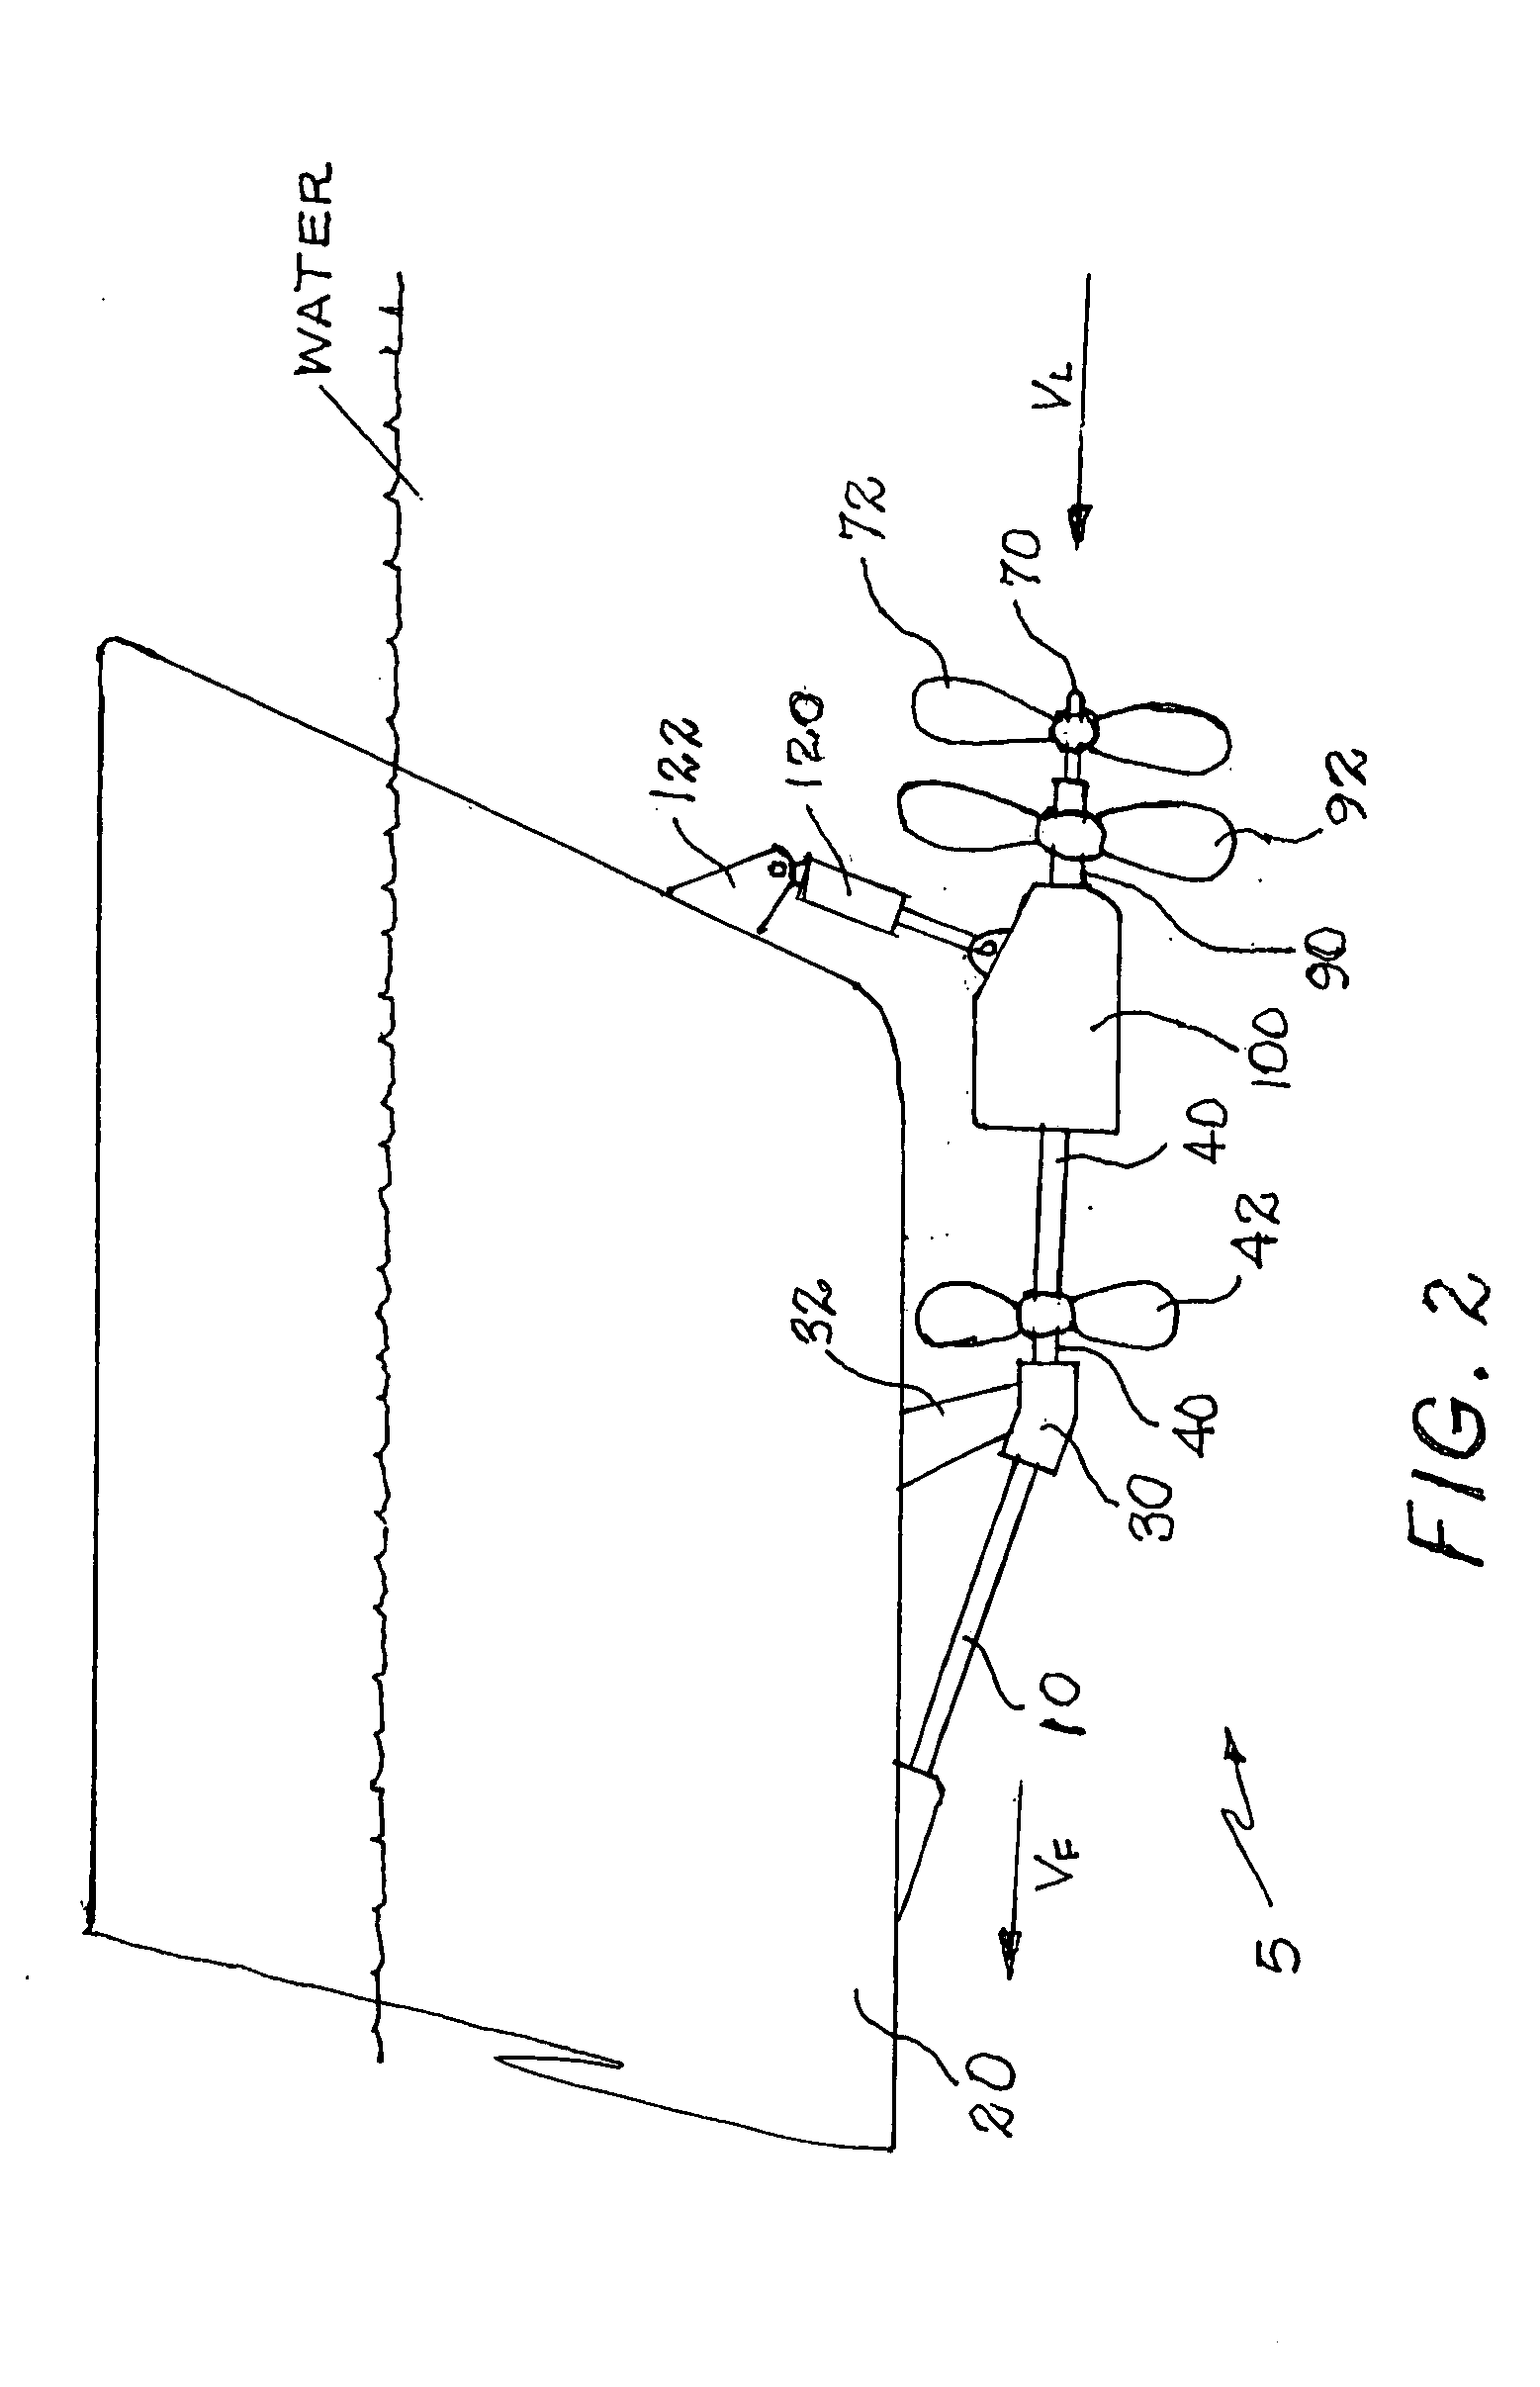 Propulsion system for a ship or seagoing vessel